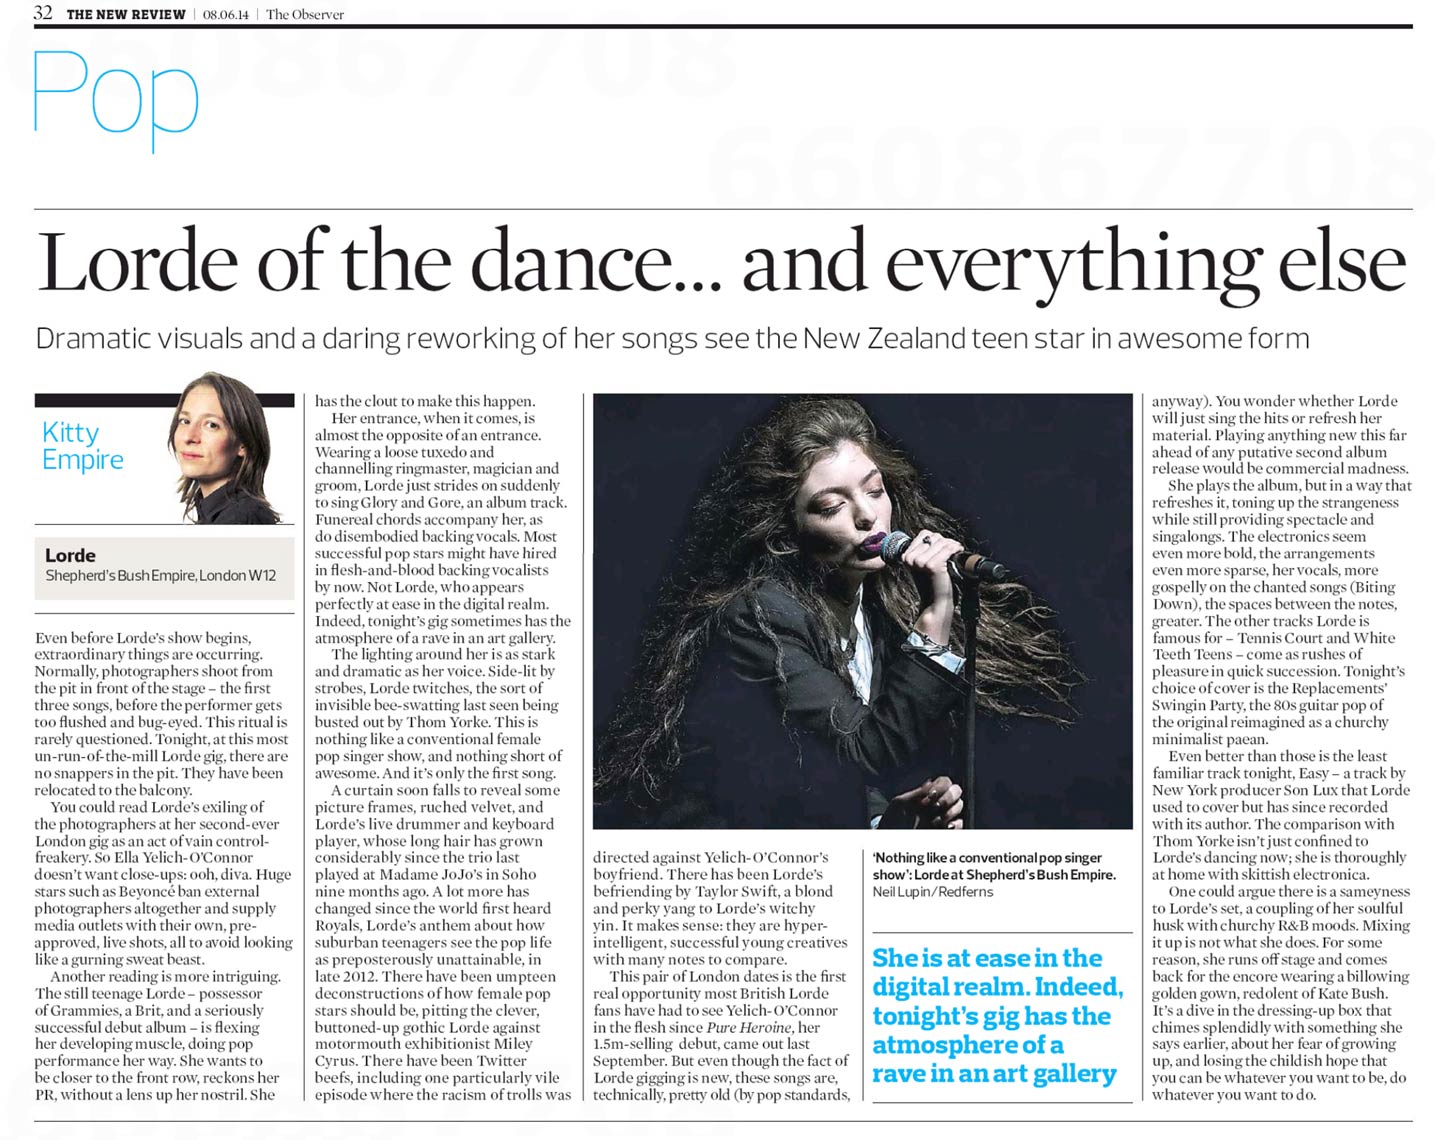 Lorde-Observer-New-Review-DUP.jpg